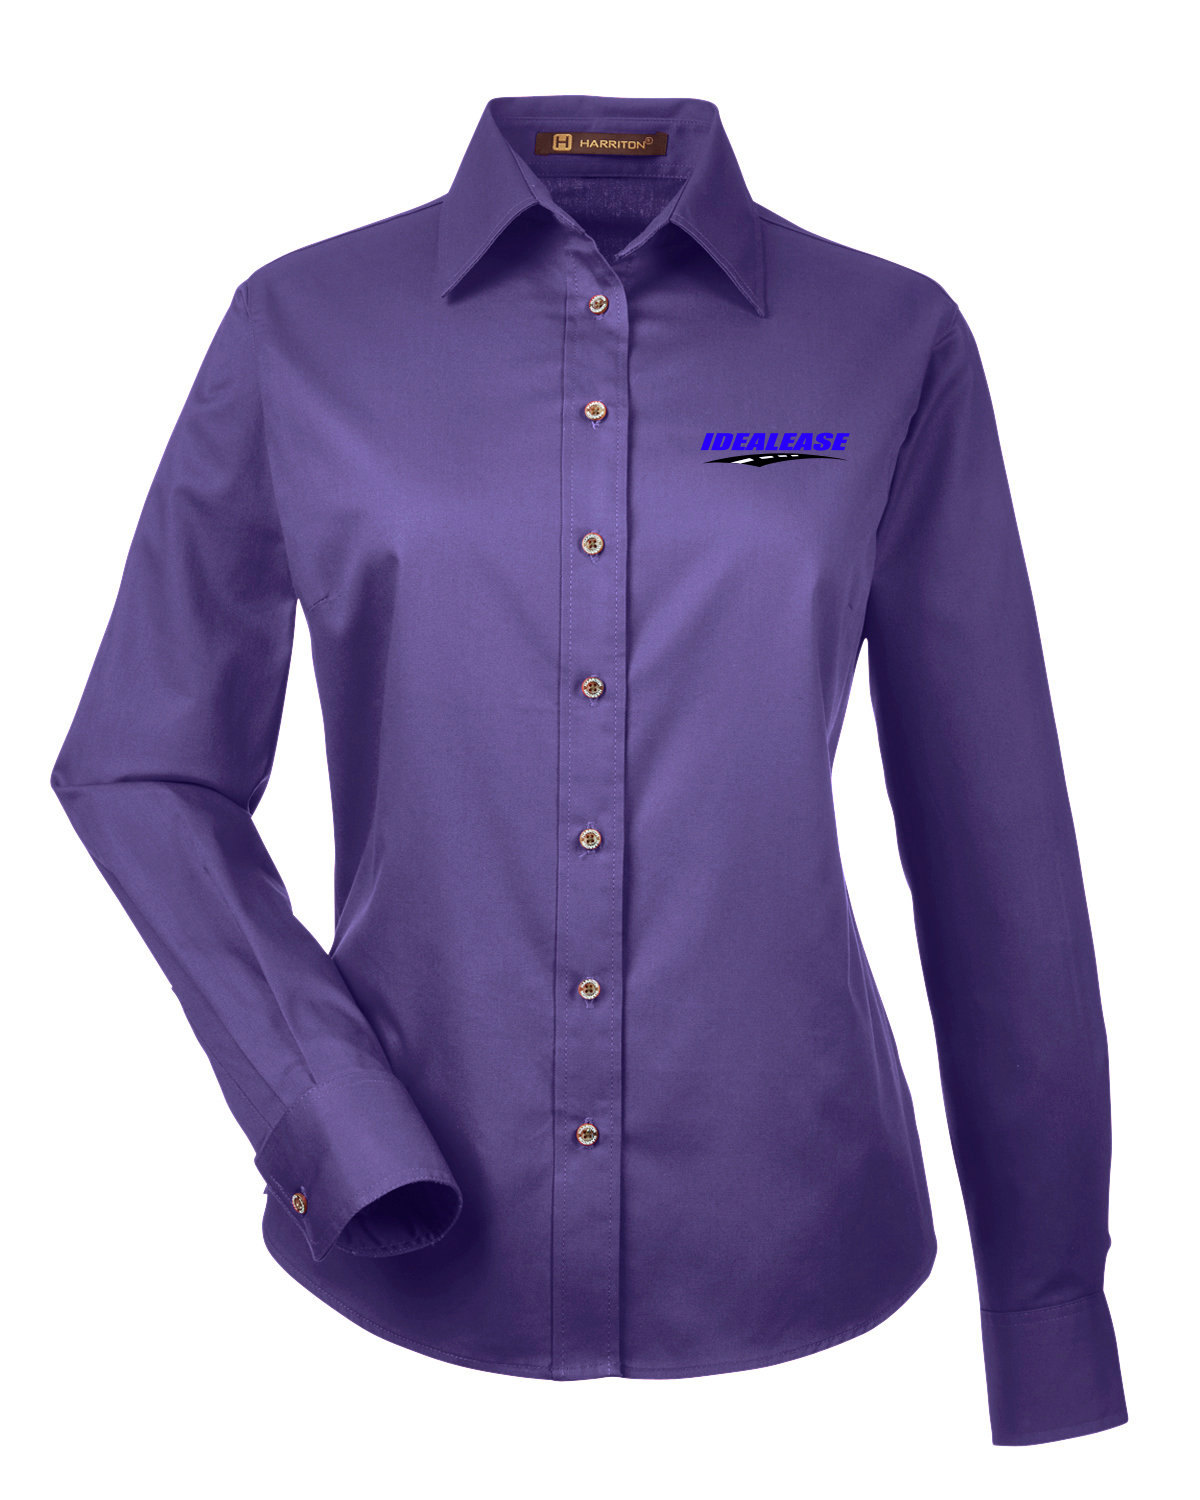 Idealease Ladies' Easy Blend™ Long-Sleeve Twill Shirt with Stain-Release